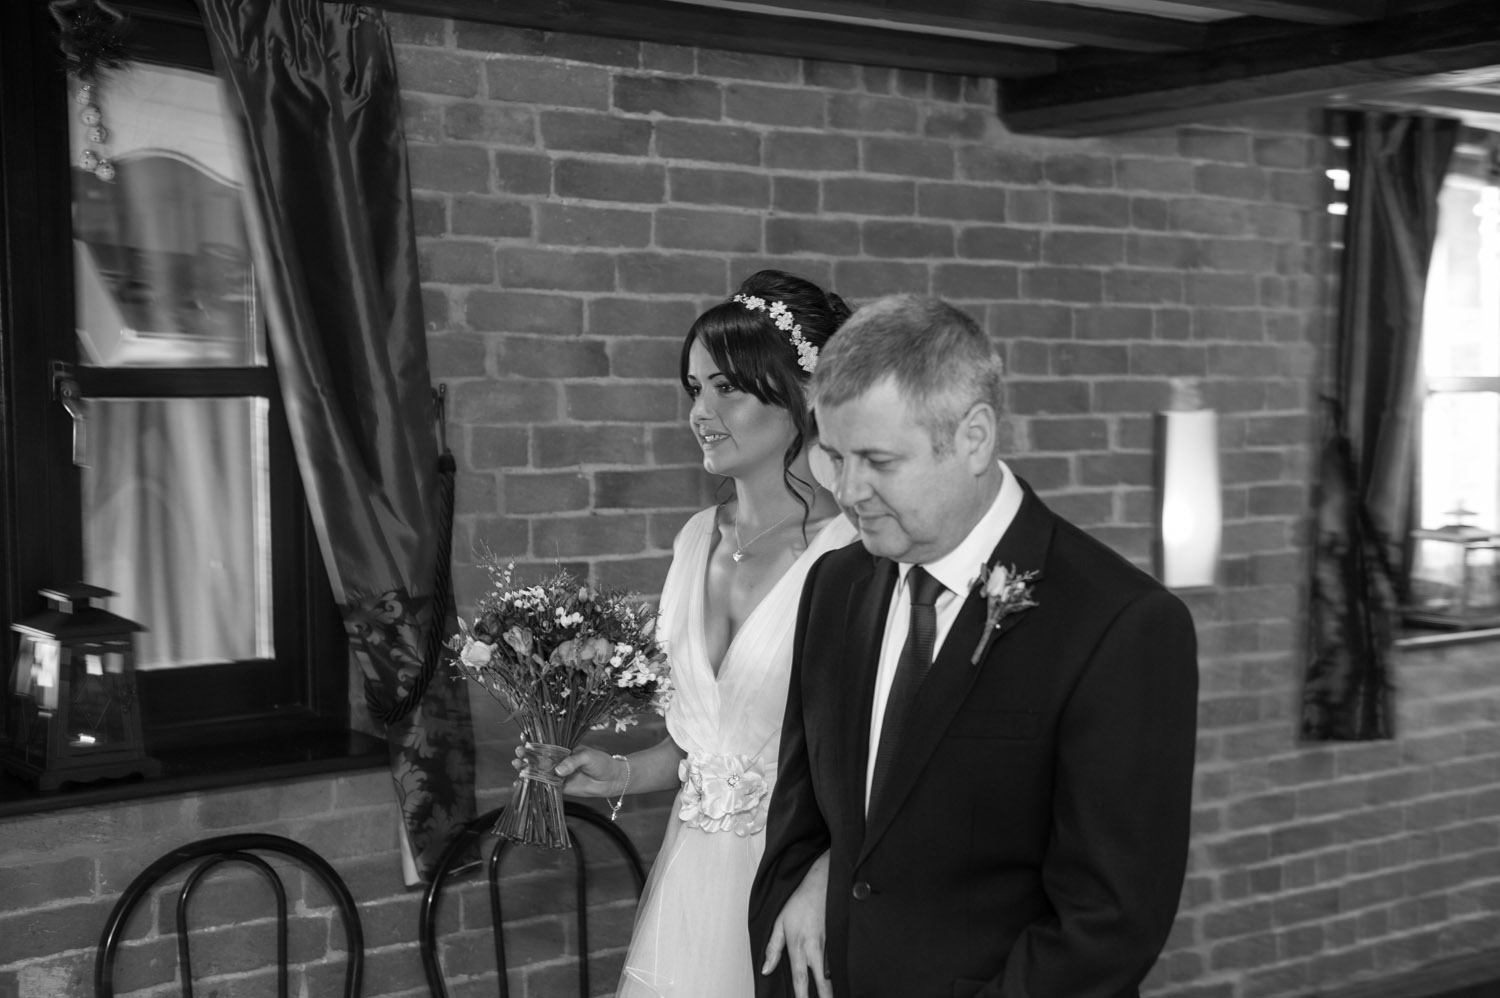 Bride and her father at Swancar Farm wedding